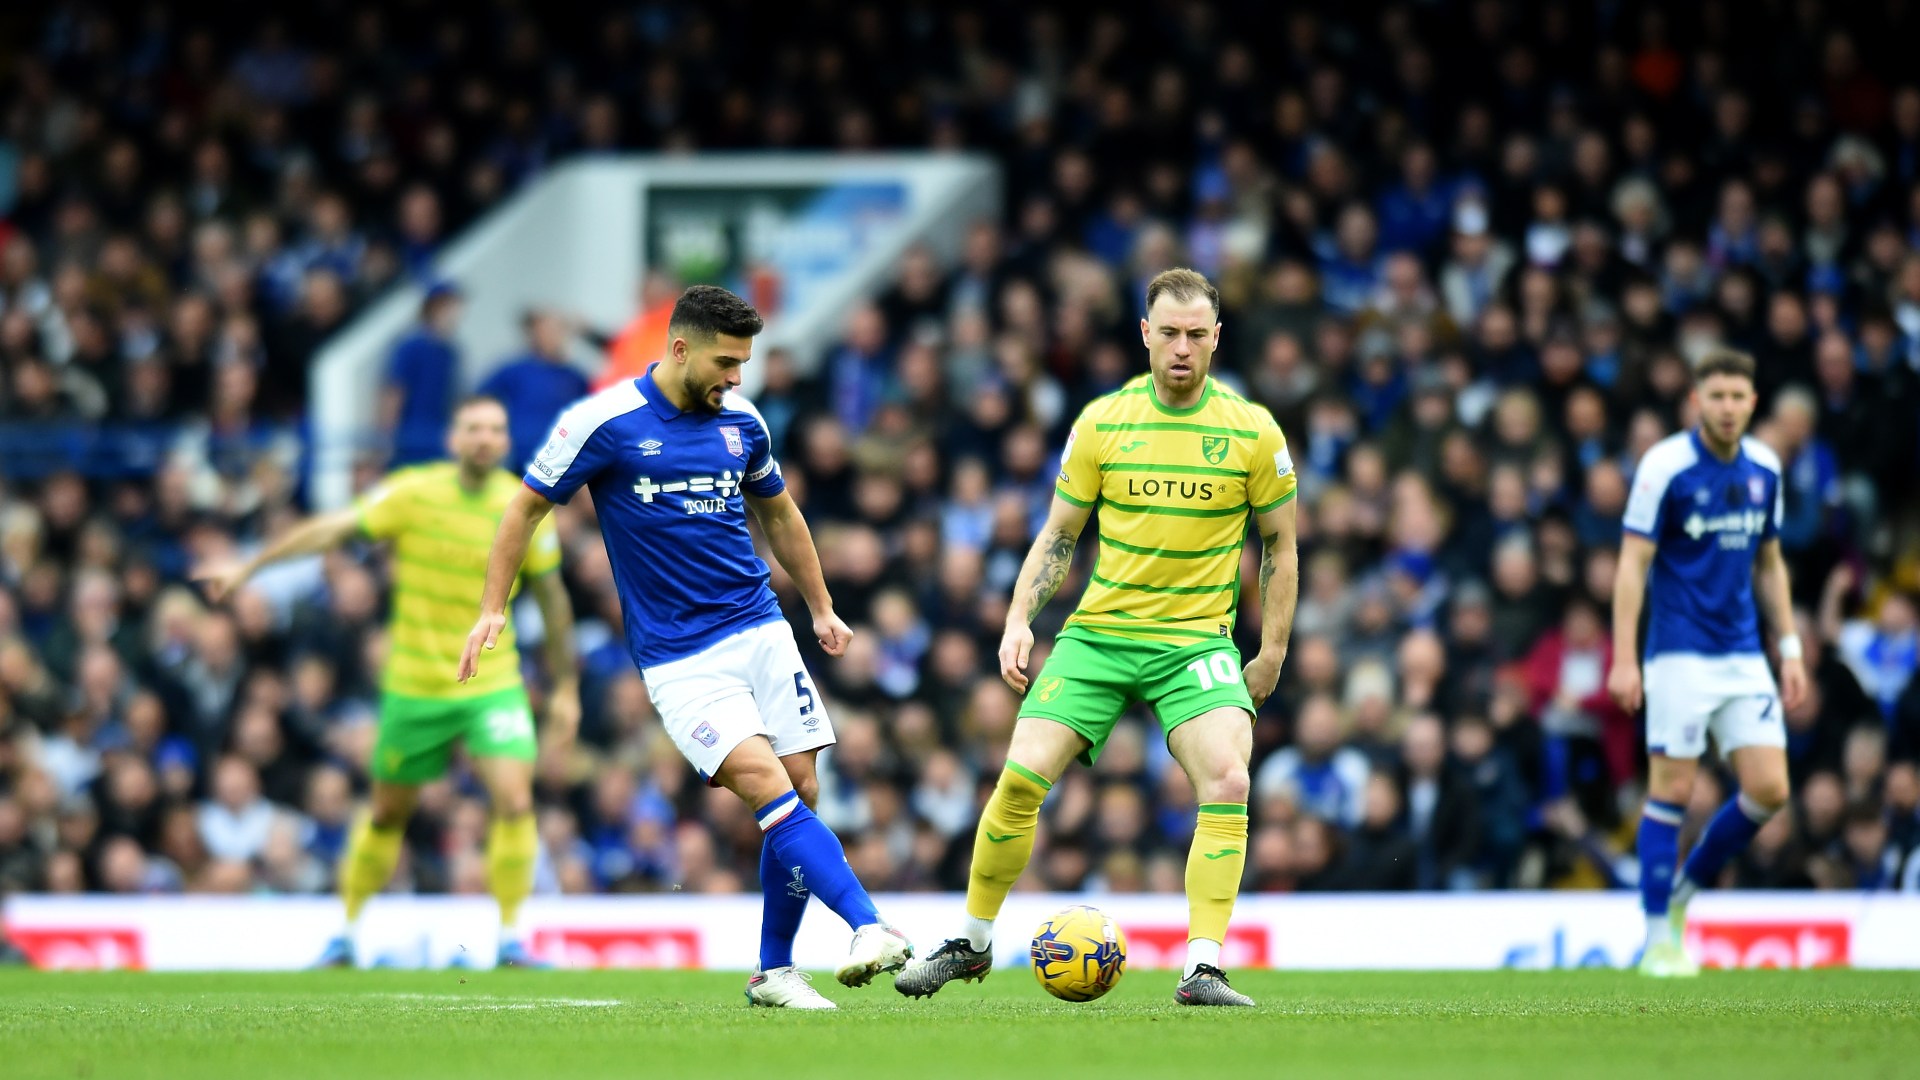 Norwich vs Ipswich LIVE commentary: Rivals meet for crucial East Anglian derby - kick-off time, team news and talkSPORT coverage